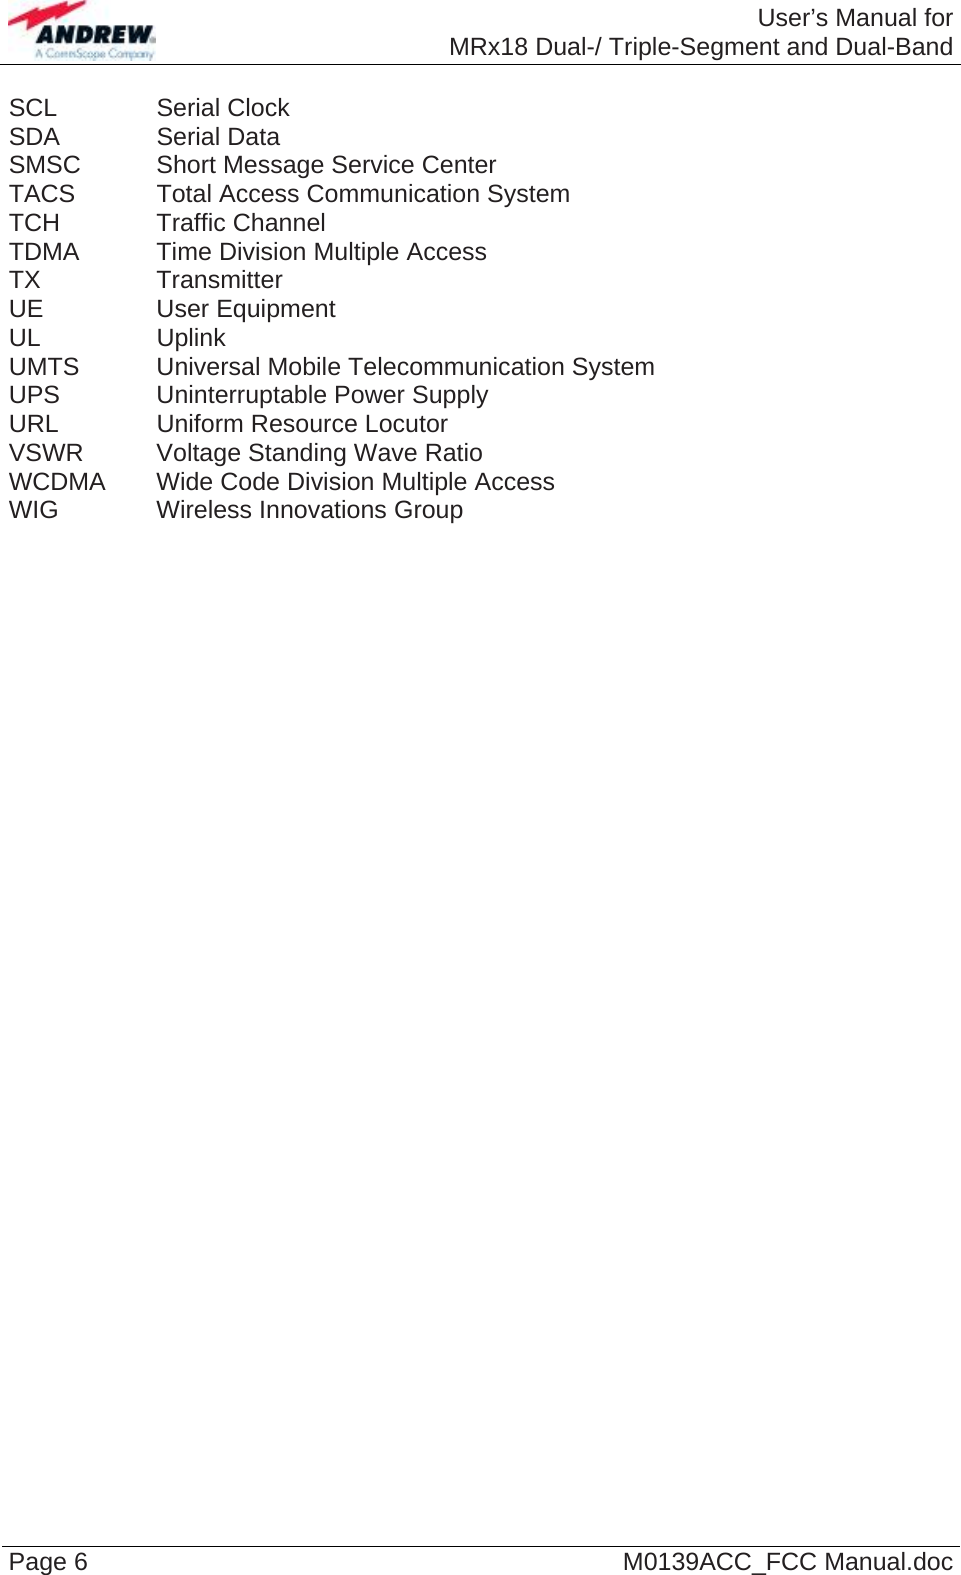  User’s Manual forMRx18 Dual-/ Triple-Segment and Dual-Band Page 6  M0139ACC_FCC Manual.doc SCL   Serial Clock SDA   Serial Data SMSC   Short Message Service Center TACS   Total Access Communication System TCH   Traffic Channel TDMA   Time Division Multiple Access TX   Transmitter UE   User Equipment UL   Uplink UMTS   Universal  Mobile  Telecommunication System UPS    Uninterruptable Power Supply URL    Uniform Resource Locutor VSWR  Voltage Standing Wave Ratio WCDMA  Wide Code Division Multiple Access WIG   Wireless Innovations Group  